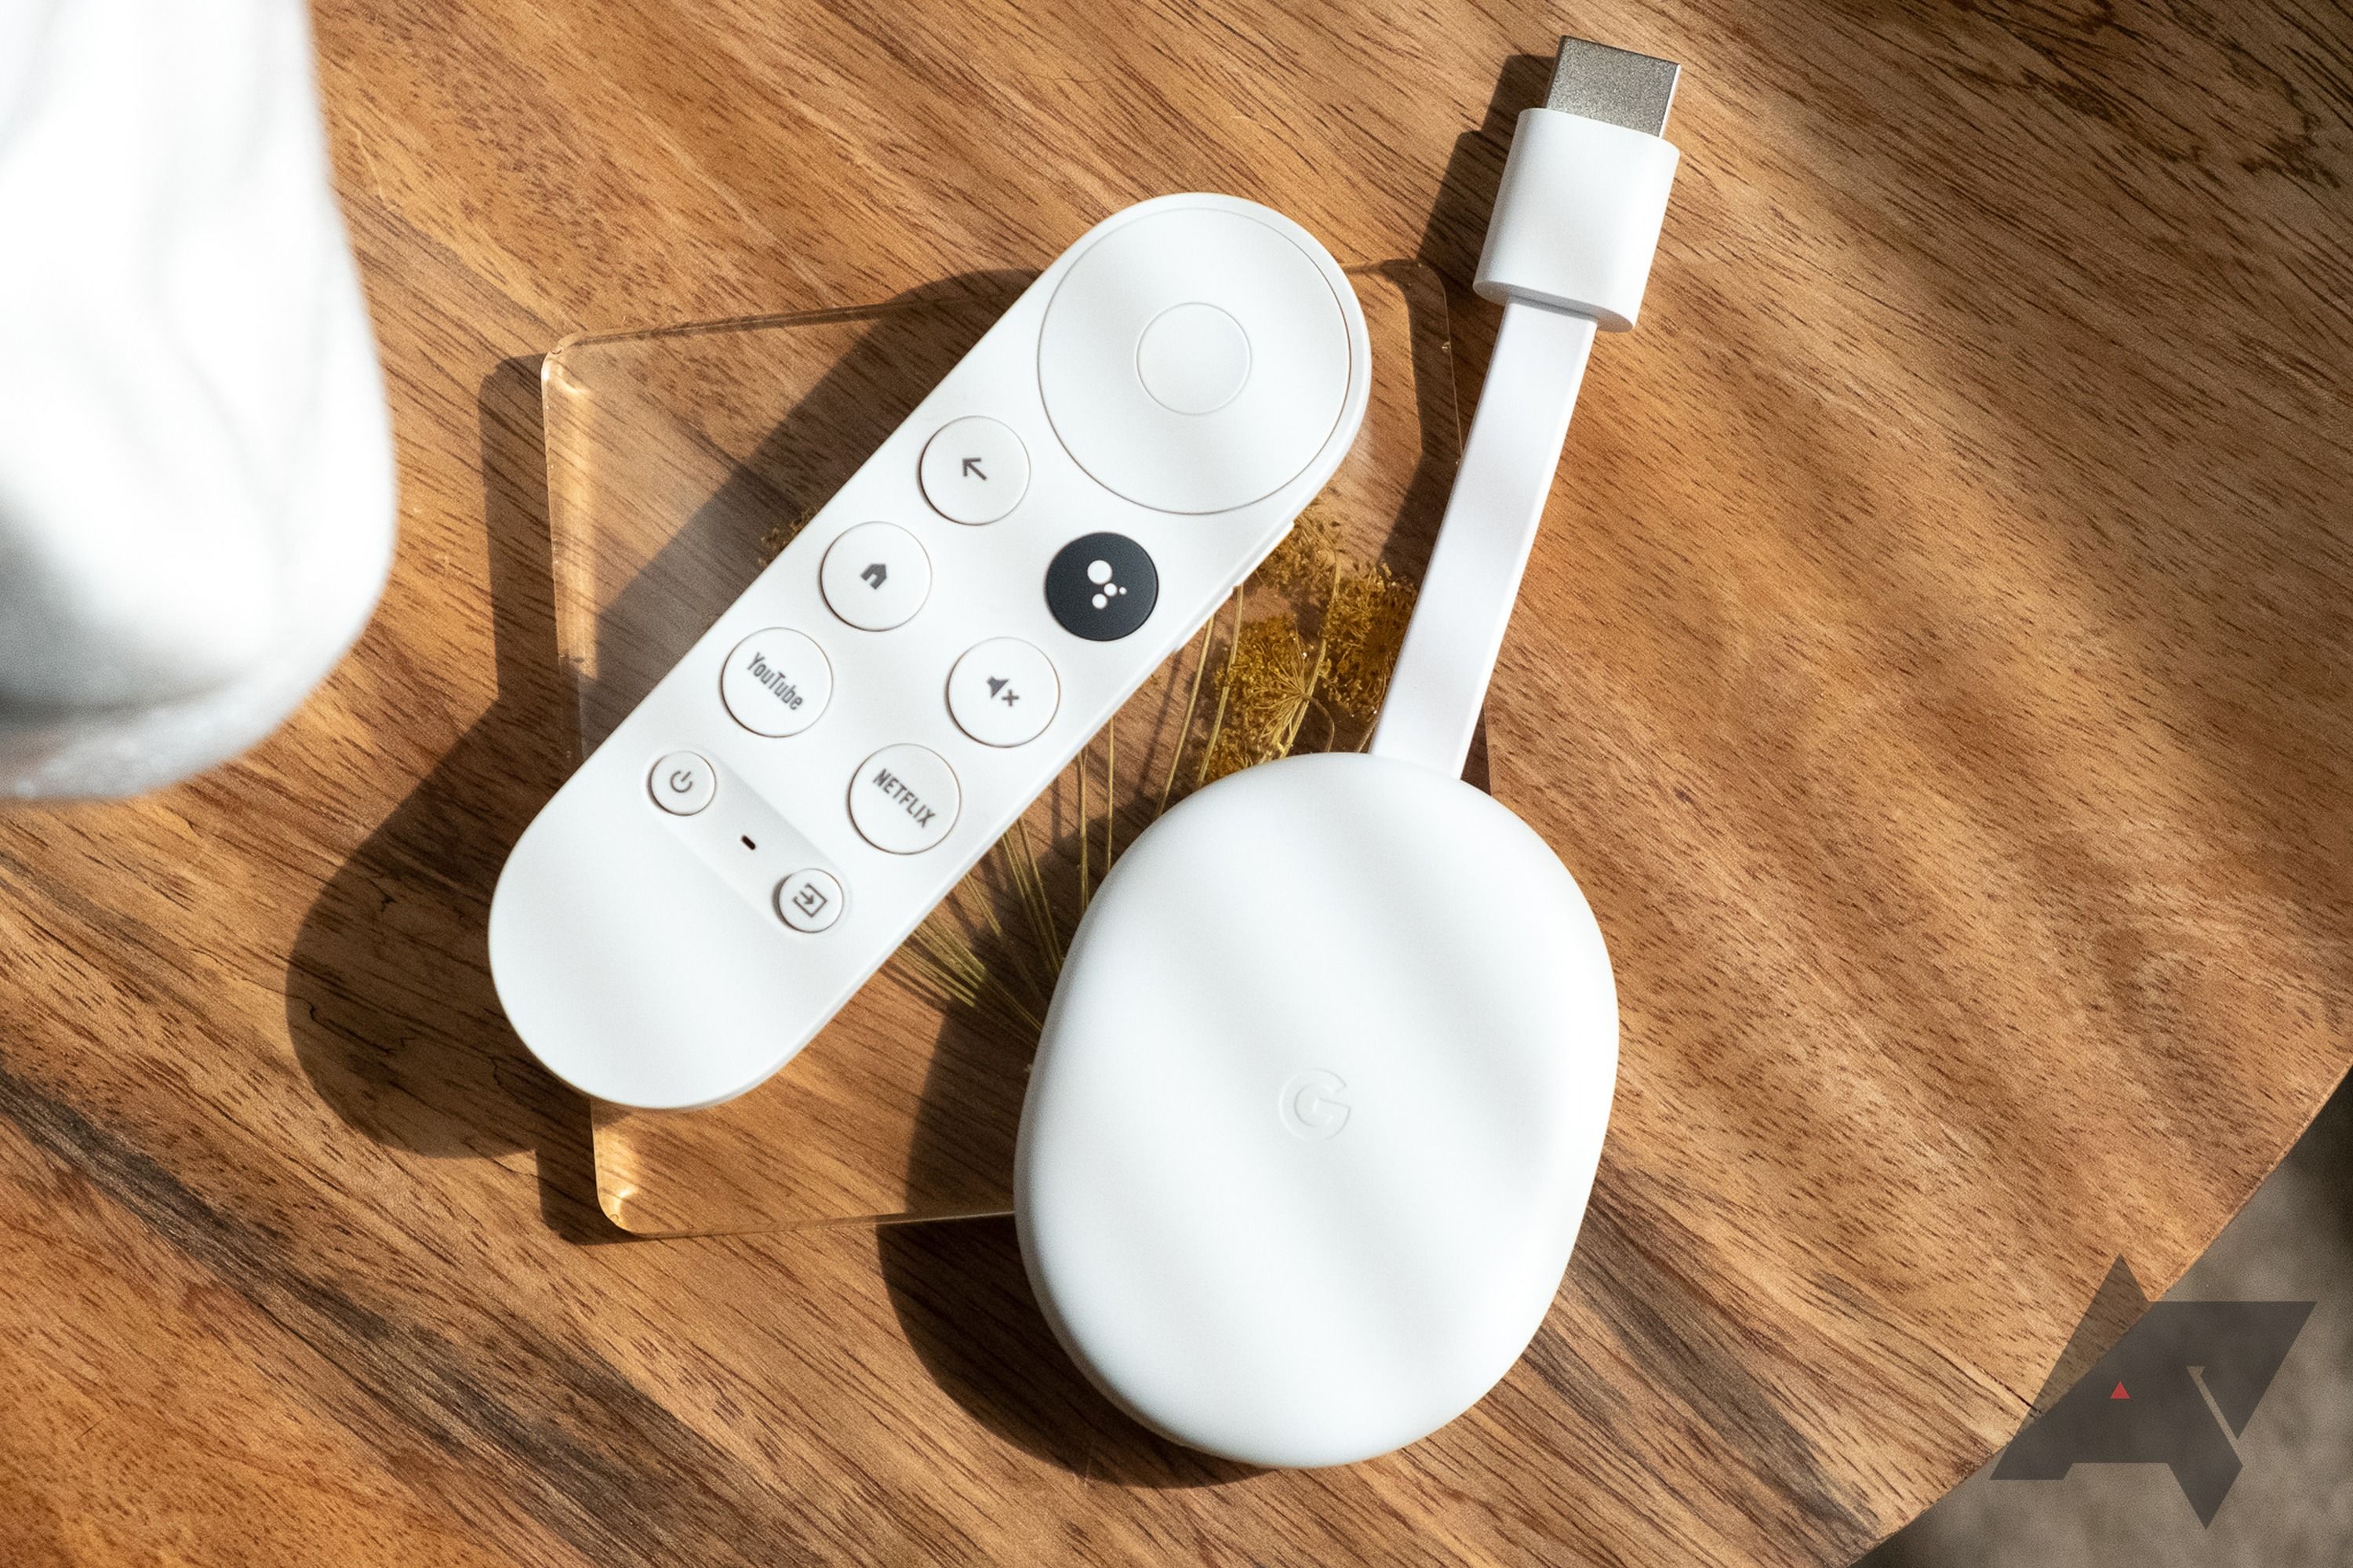 Pick up a $20 Chromecast with Google TV (HD) in its first sale since launch